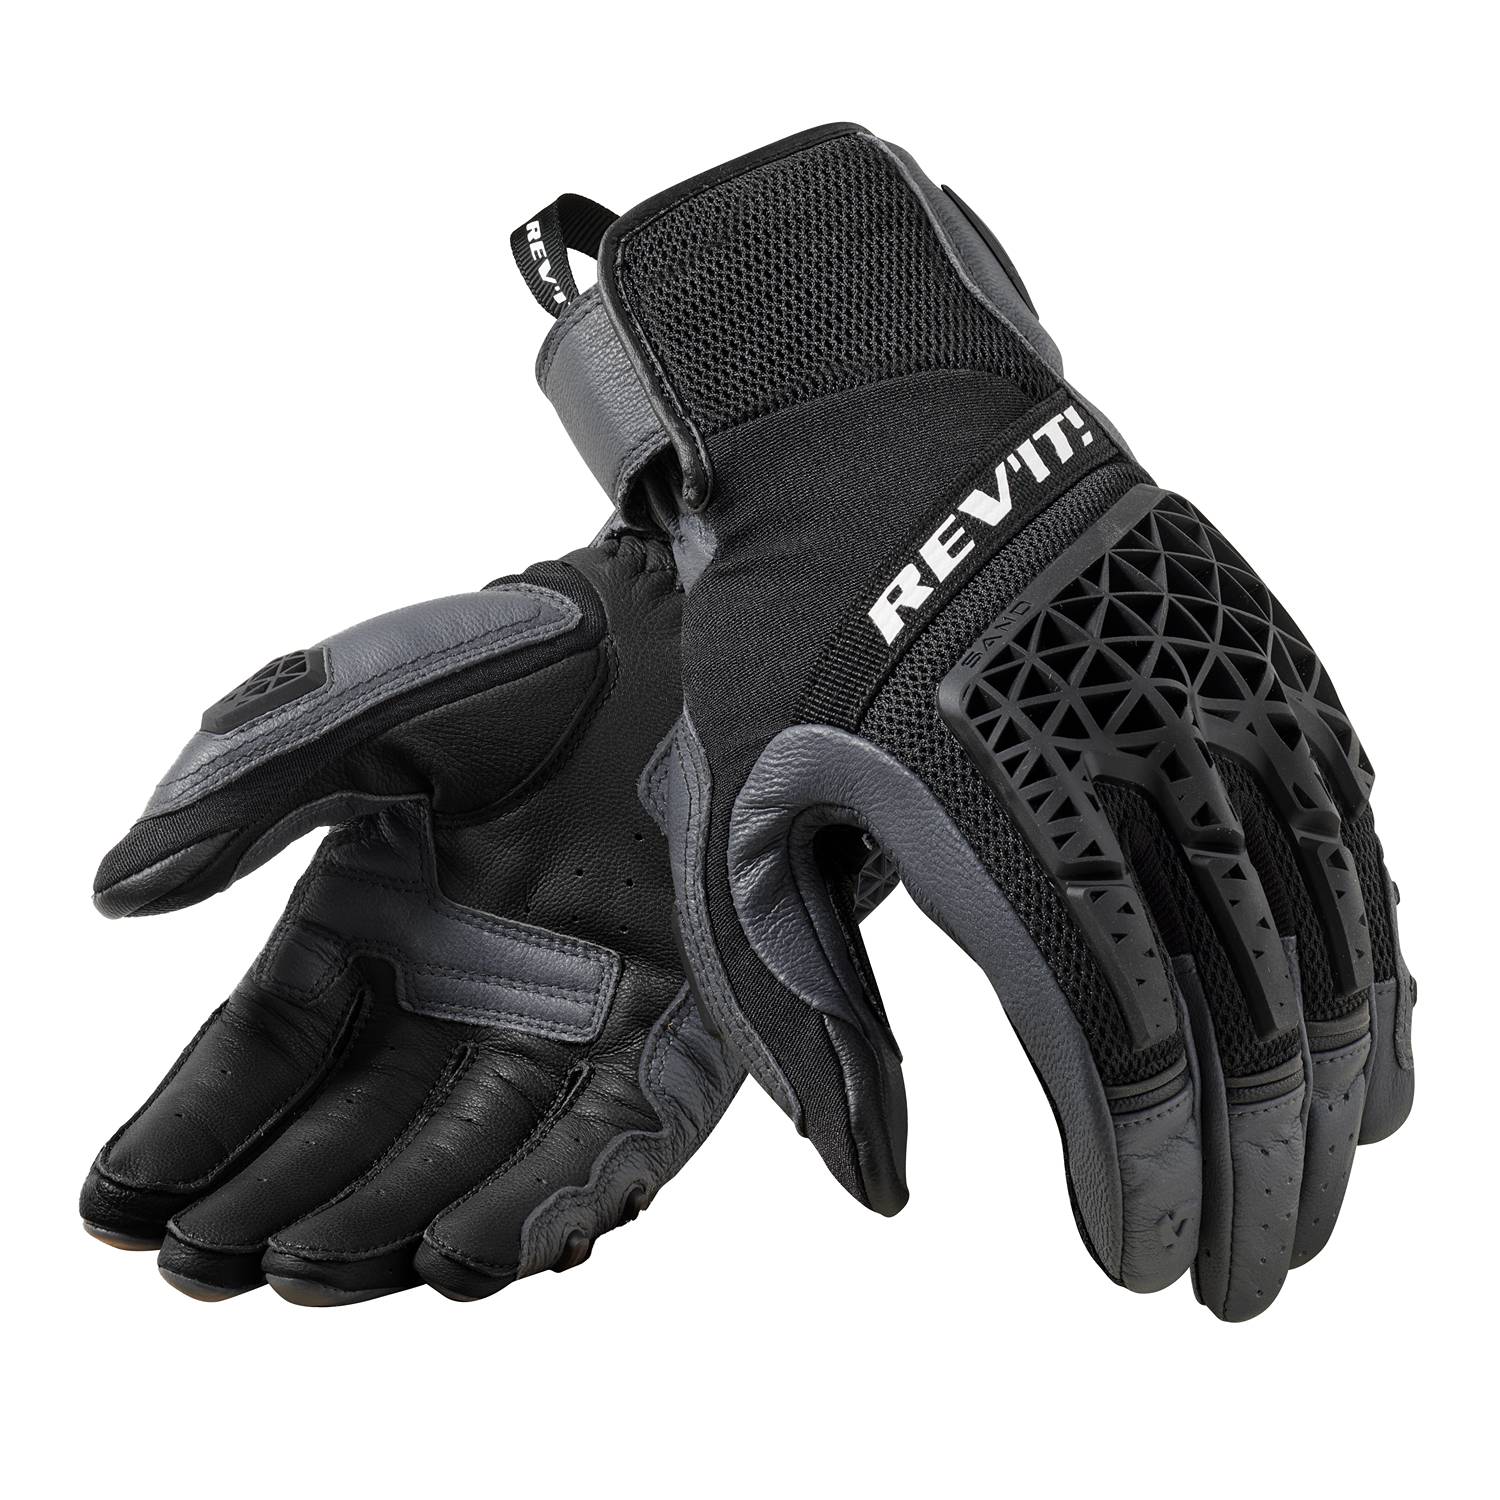 Image of REV'IT! Sand 4 Gloves Gray Black Size 3XL ID 8700001375061